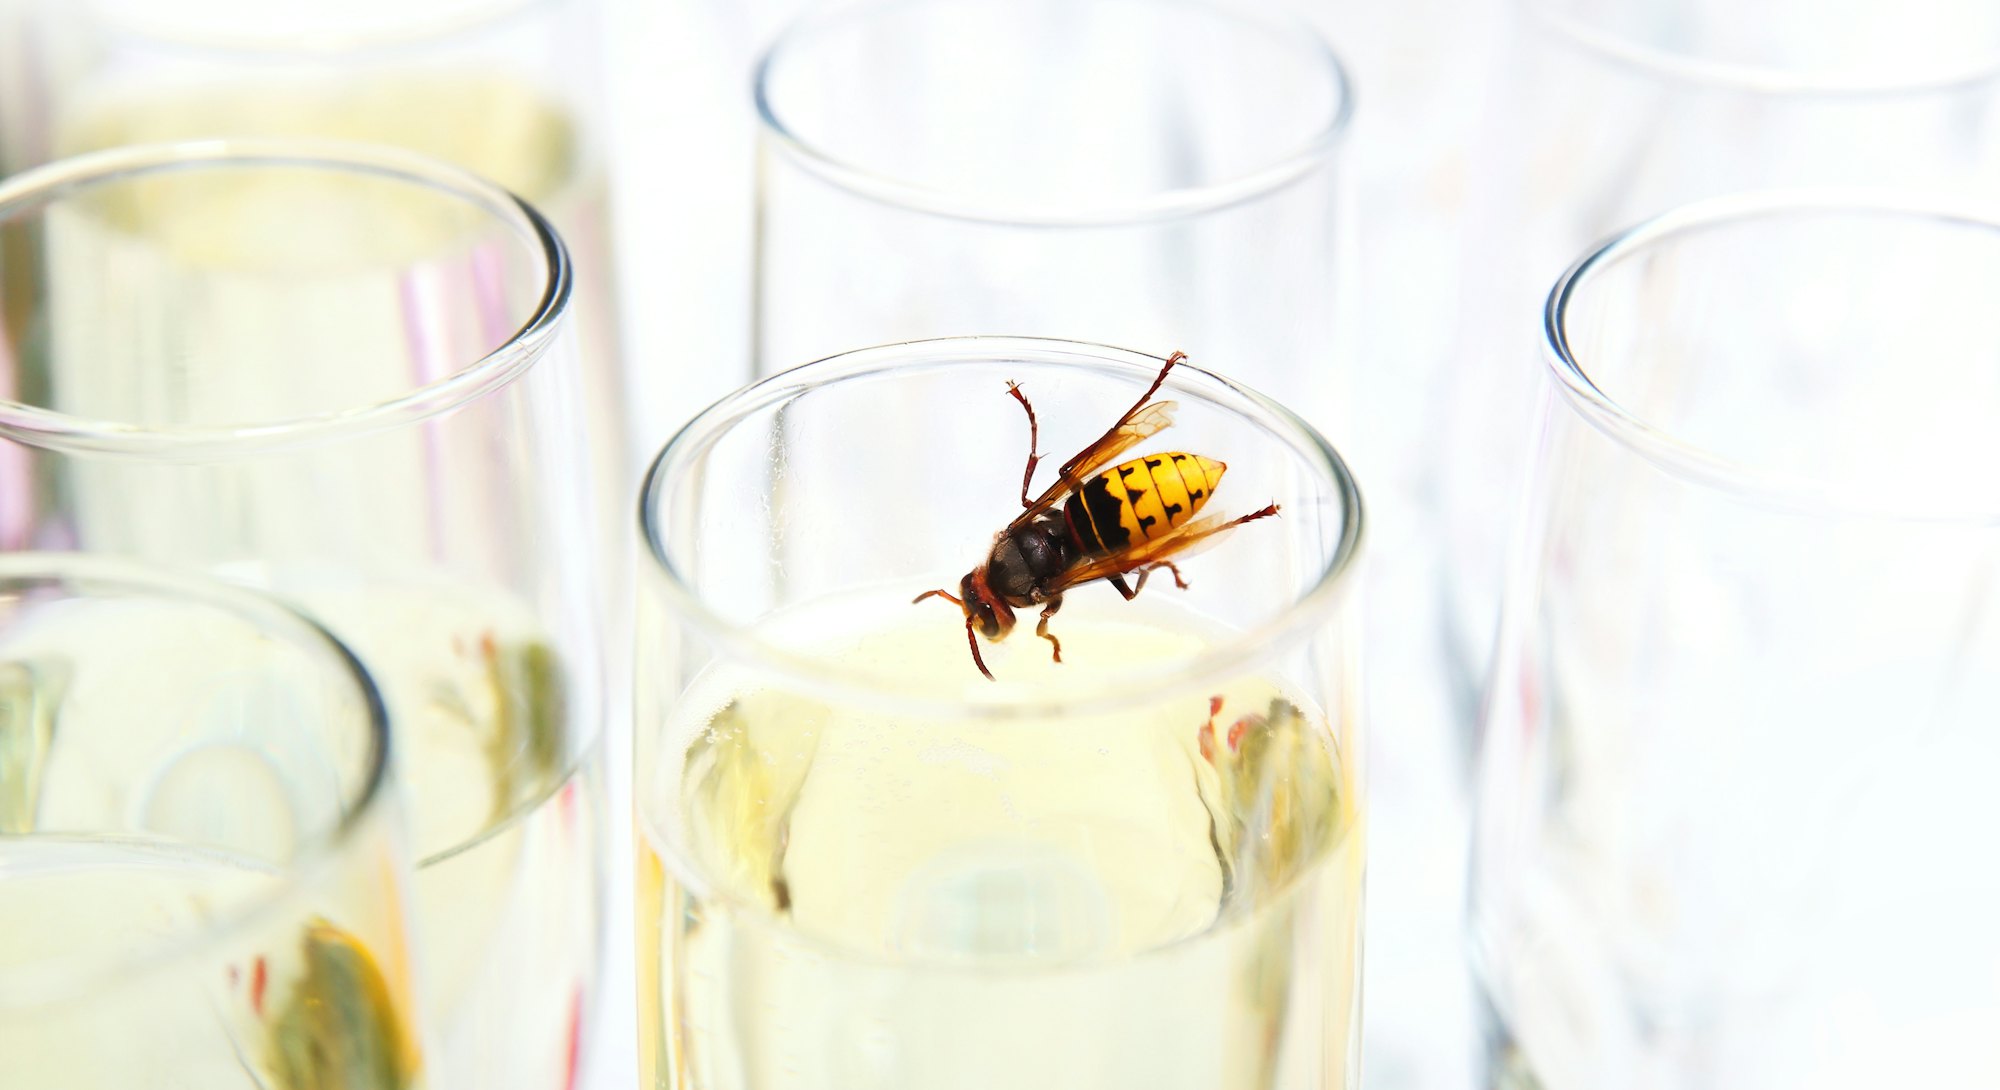 A wasp in a glass of champagne. Drinking animal